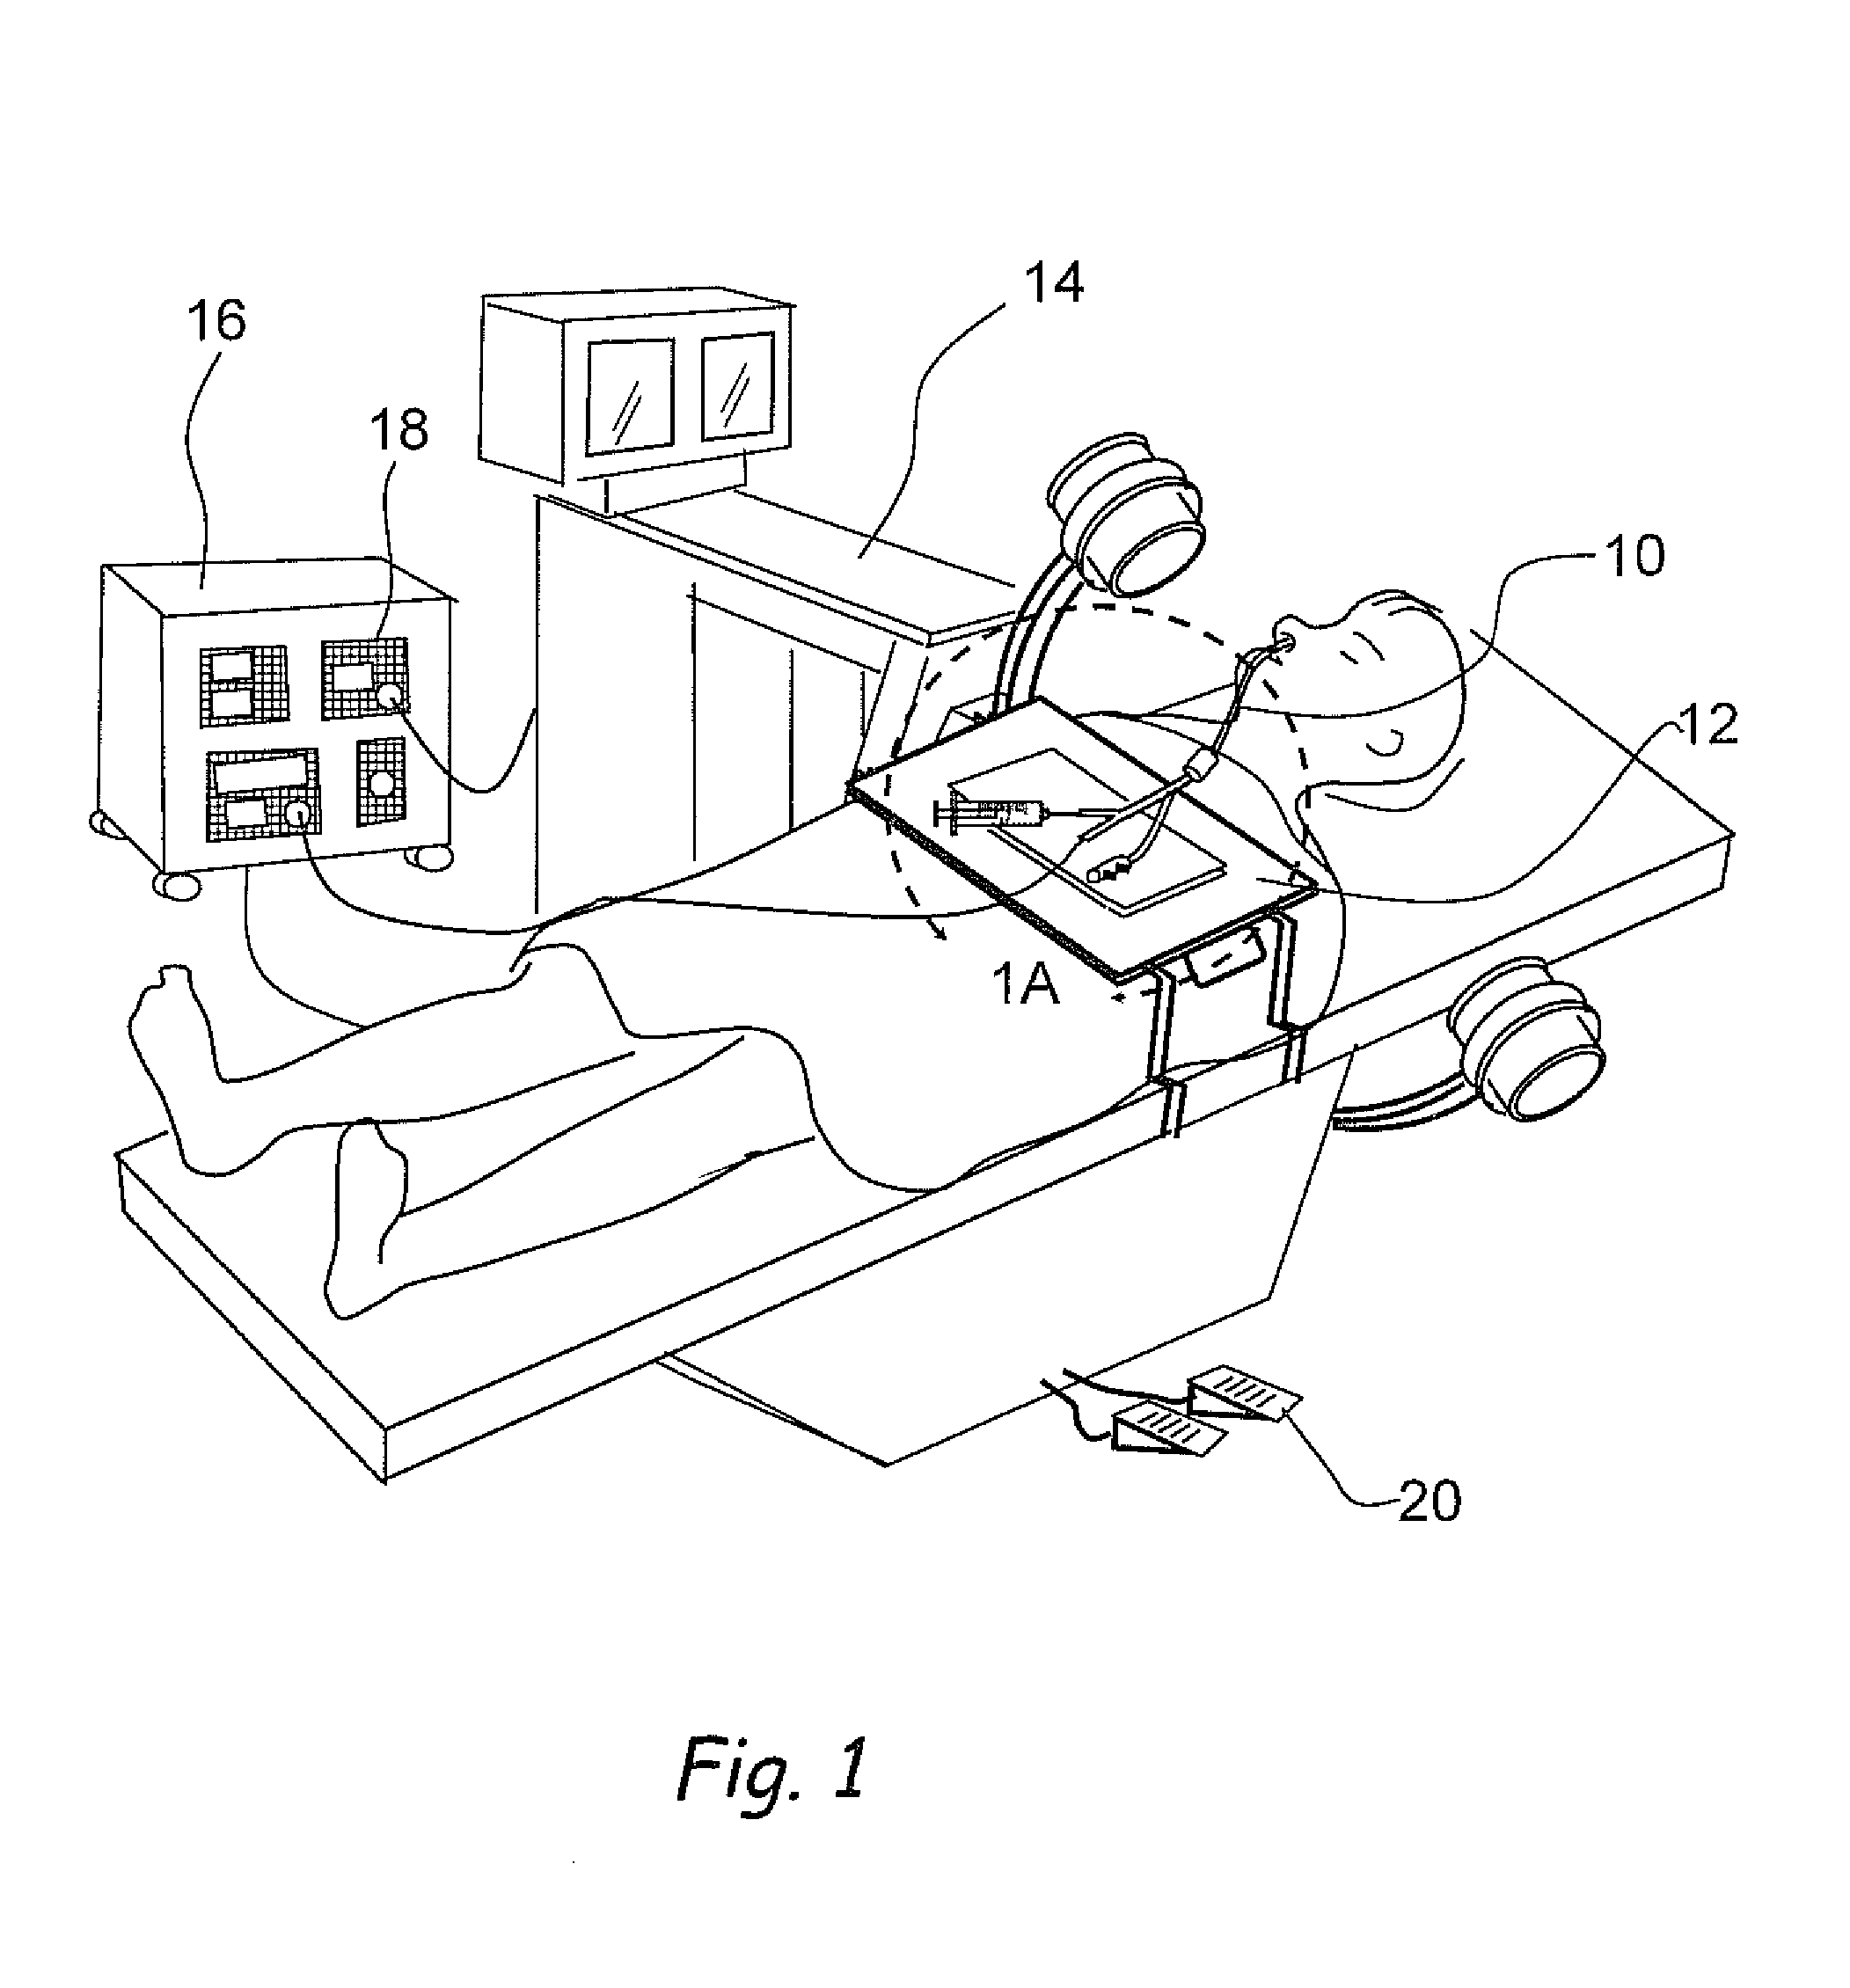 Devices, Systems and Methods for Treating Disorders of the Ear, Nose and Throat